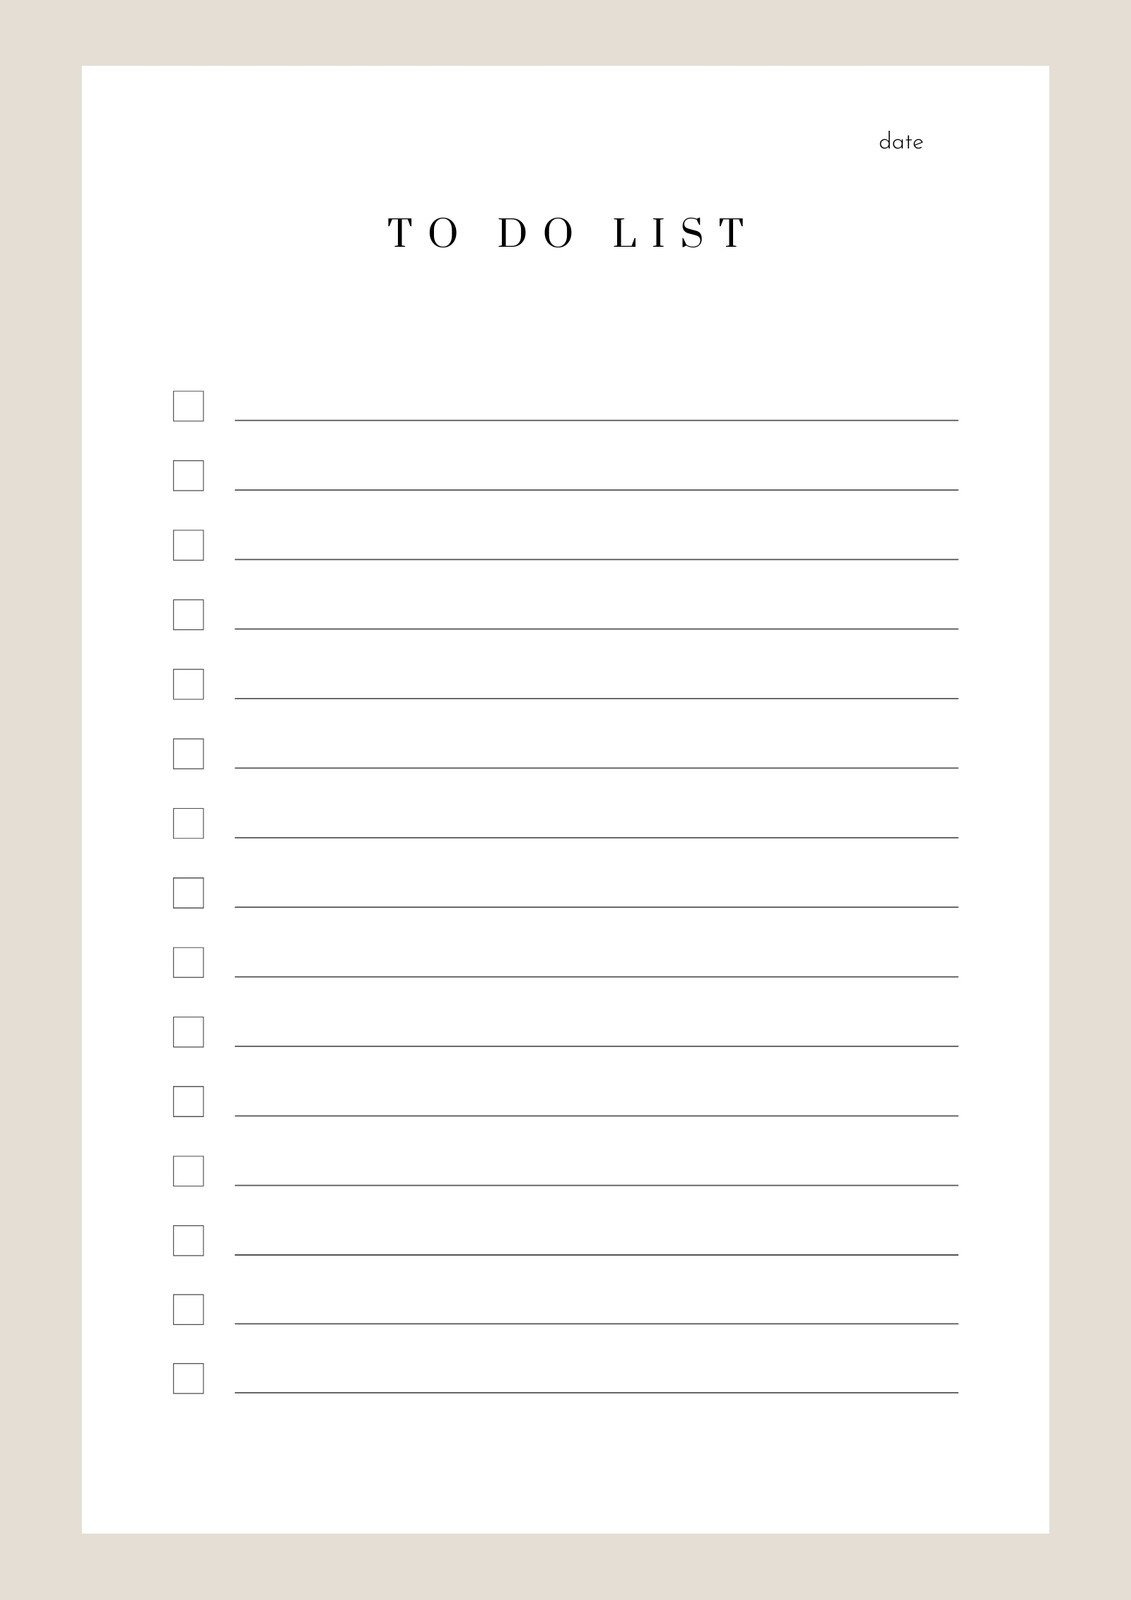 To-do Template, To Do List Layout, Todo List Layout